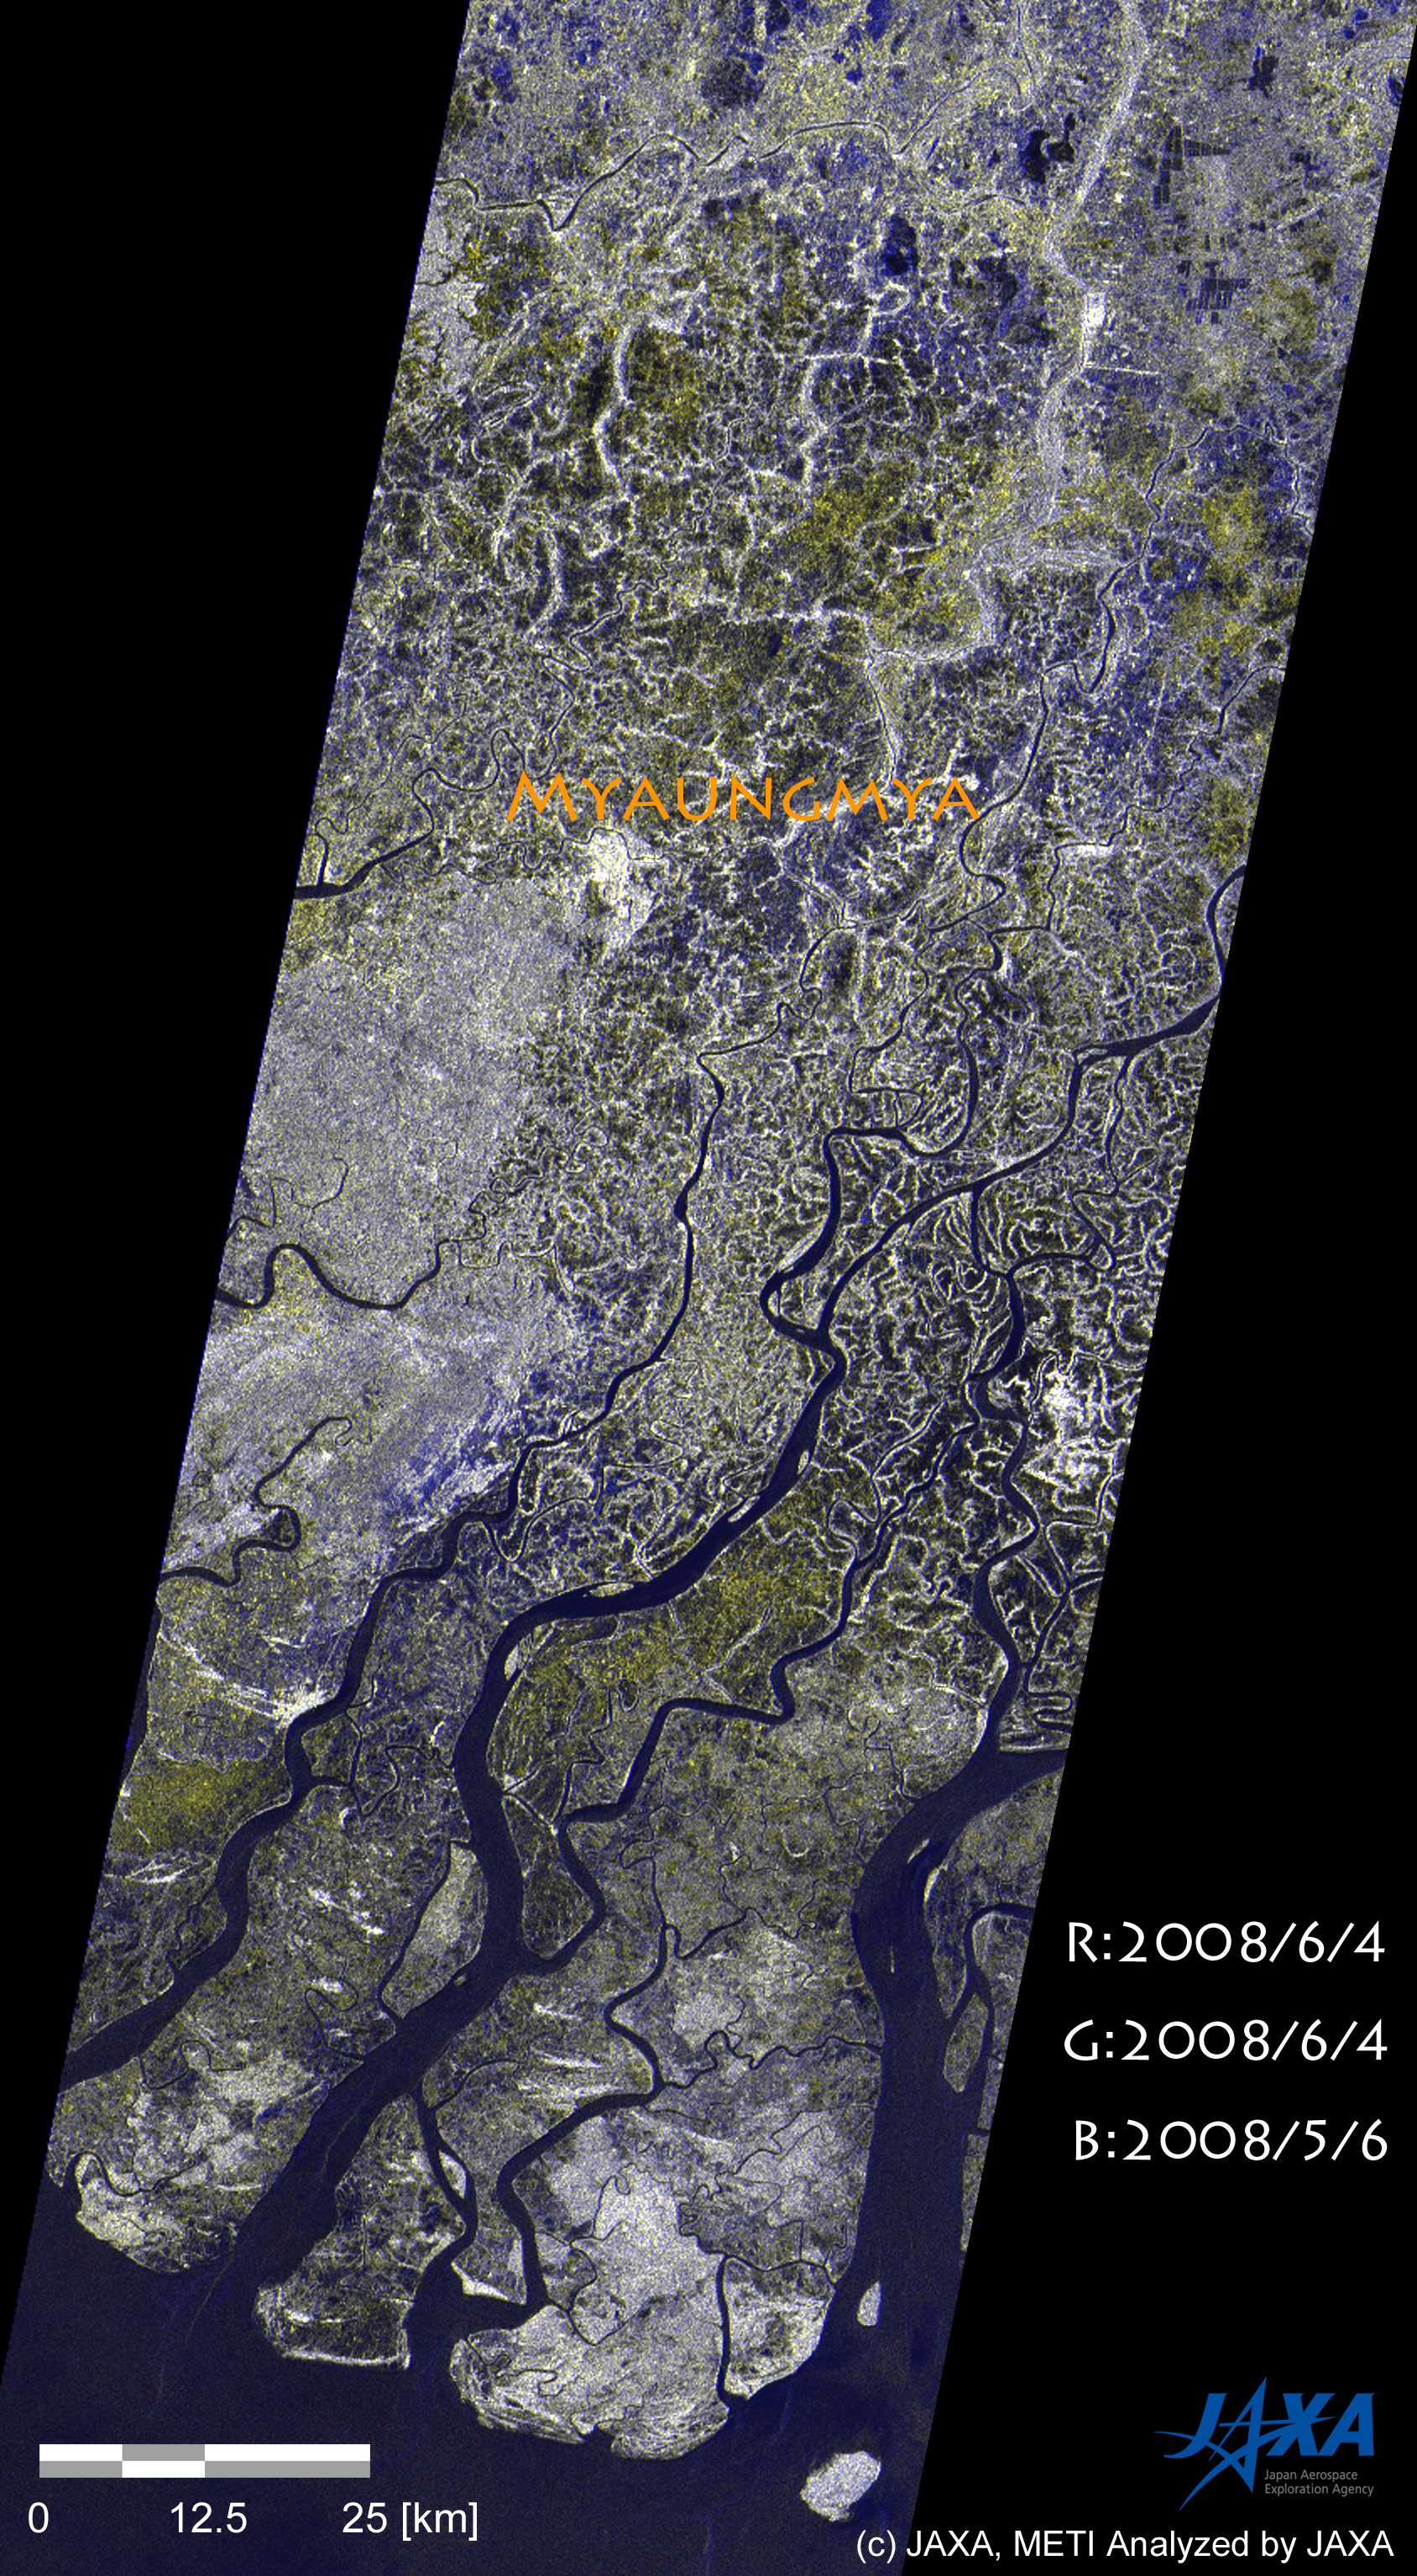 PALSAR conducted an emergency observation around the river mouth of Irrawaddy on May 6, 2008 just after the hit of Cyclone Nargis. It is possible to estimate changes in flooded areas during one month by comparing between the May 6 and June 6 images. The color composite of these images (Fig.3) shows YELLOW areas spreading around the river mouth of Irrawaddy and north of Myaungmya. Water levels in these areas are expected to lower. On the other hand, some BLUE areas exist, suggesting newly flooded areas probably due to the general rainy cycle.